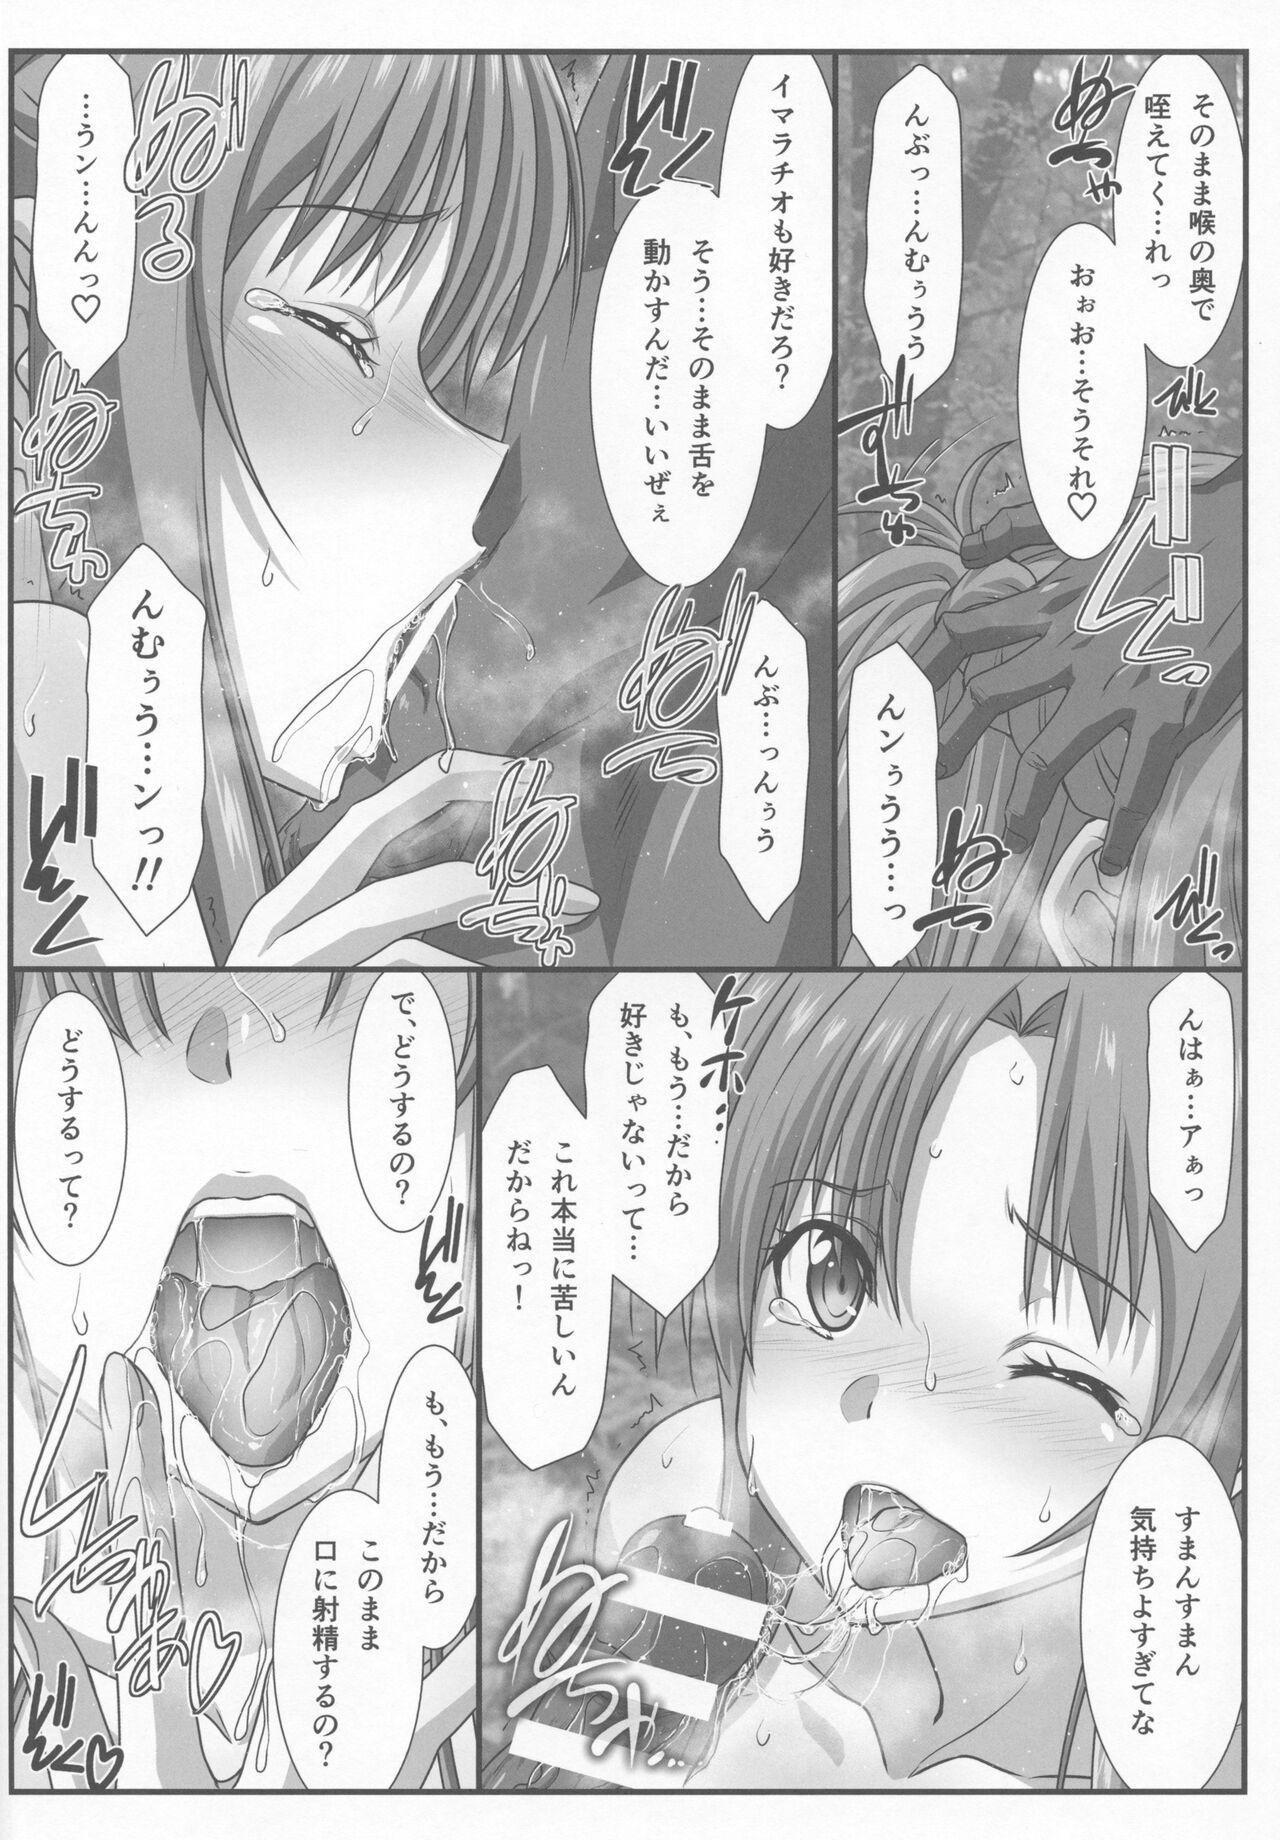 Gayporn Astral Bout Ver. 45 - Sword art online Class - Page 7